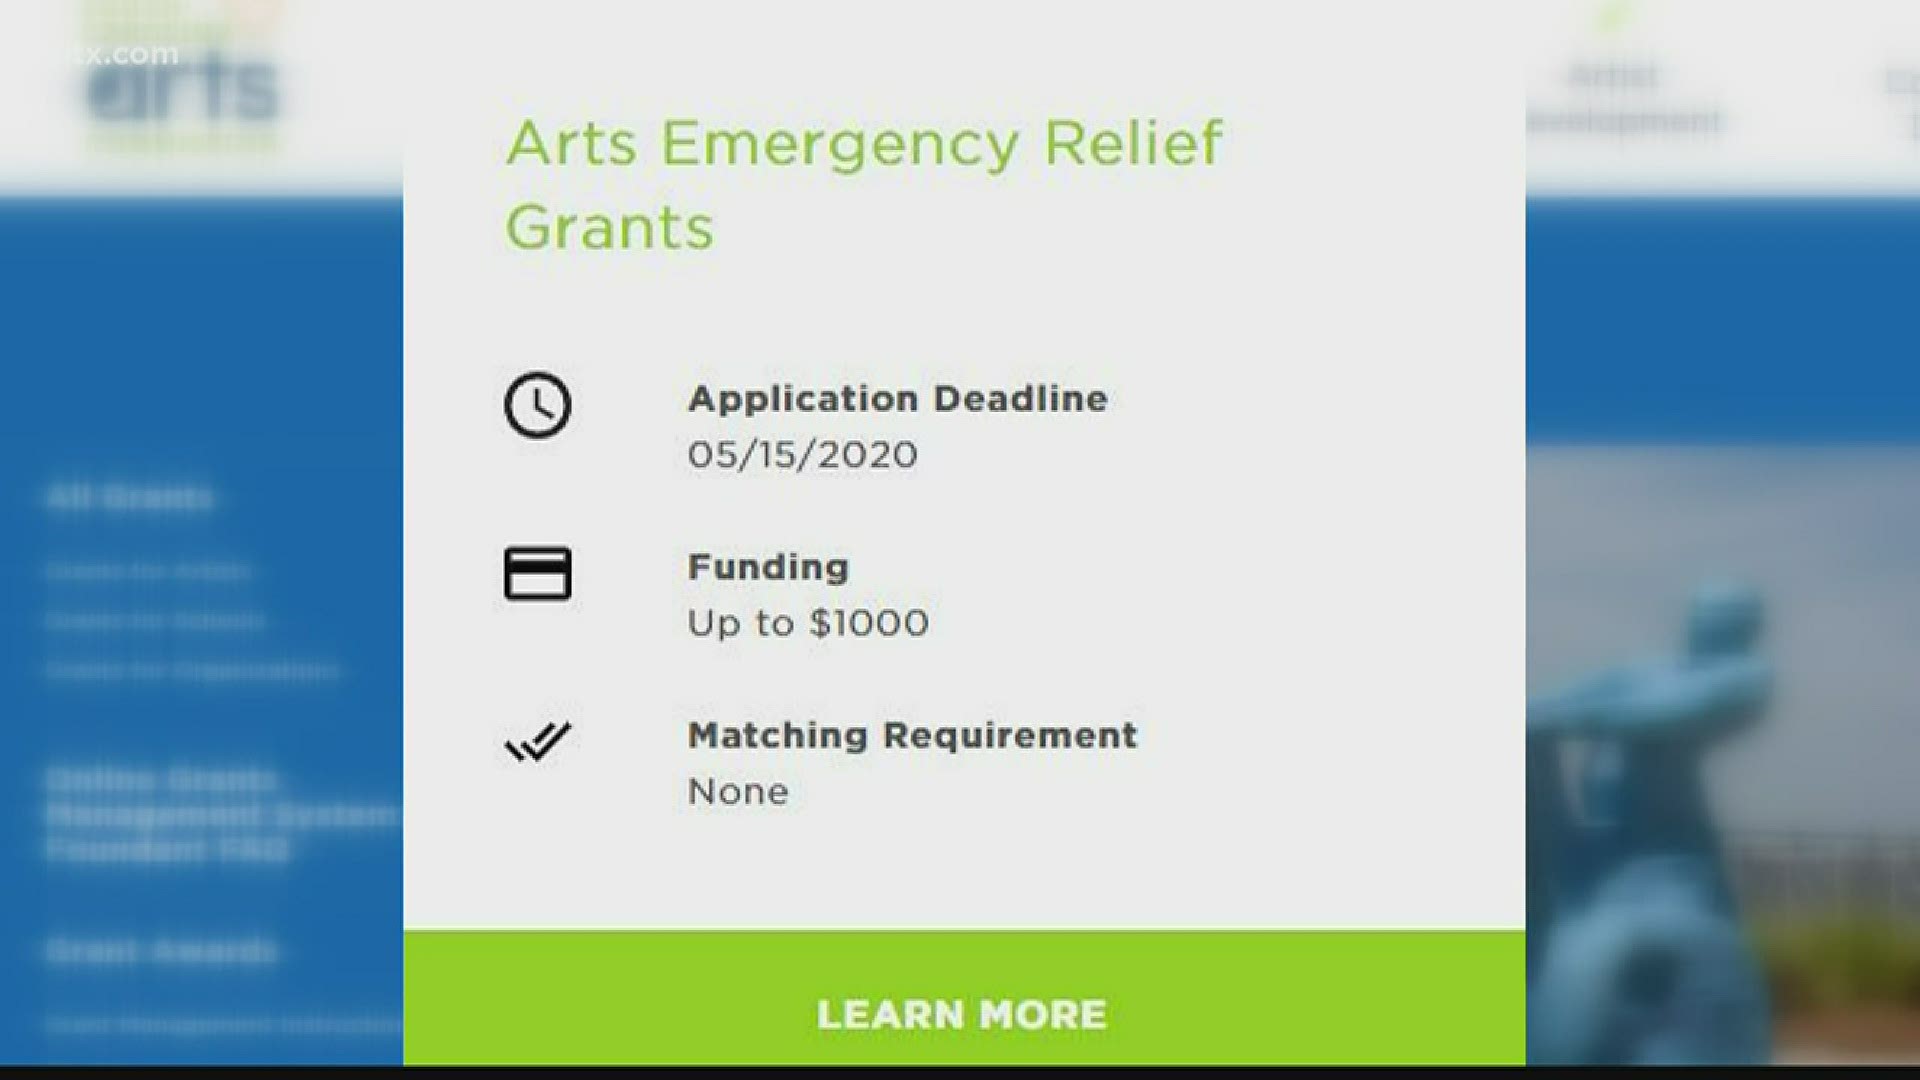 The South Carolina Arts Commission has created an emergency relief fund for South Carolina arts and culture organizations and artists.